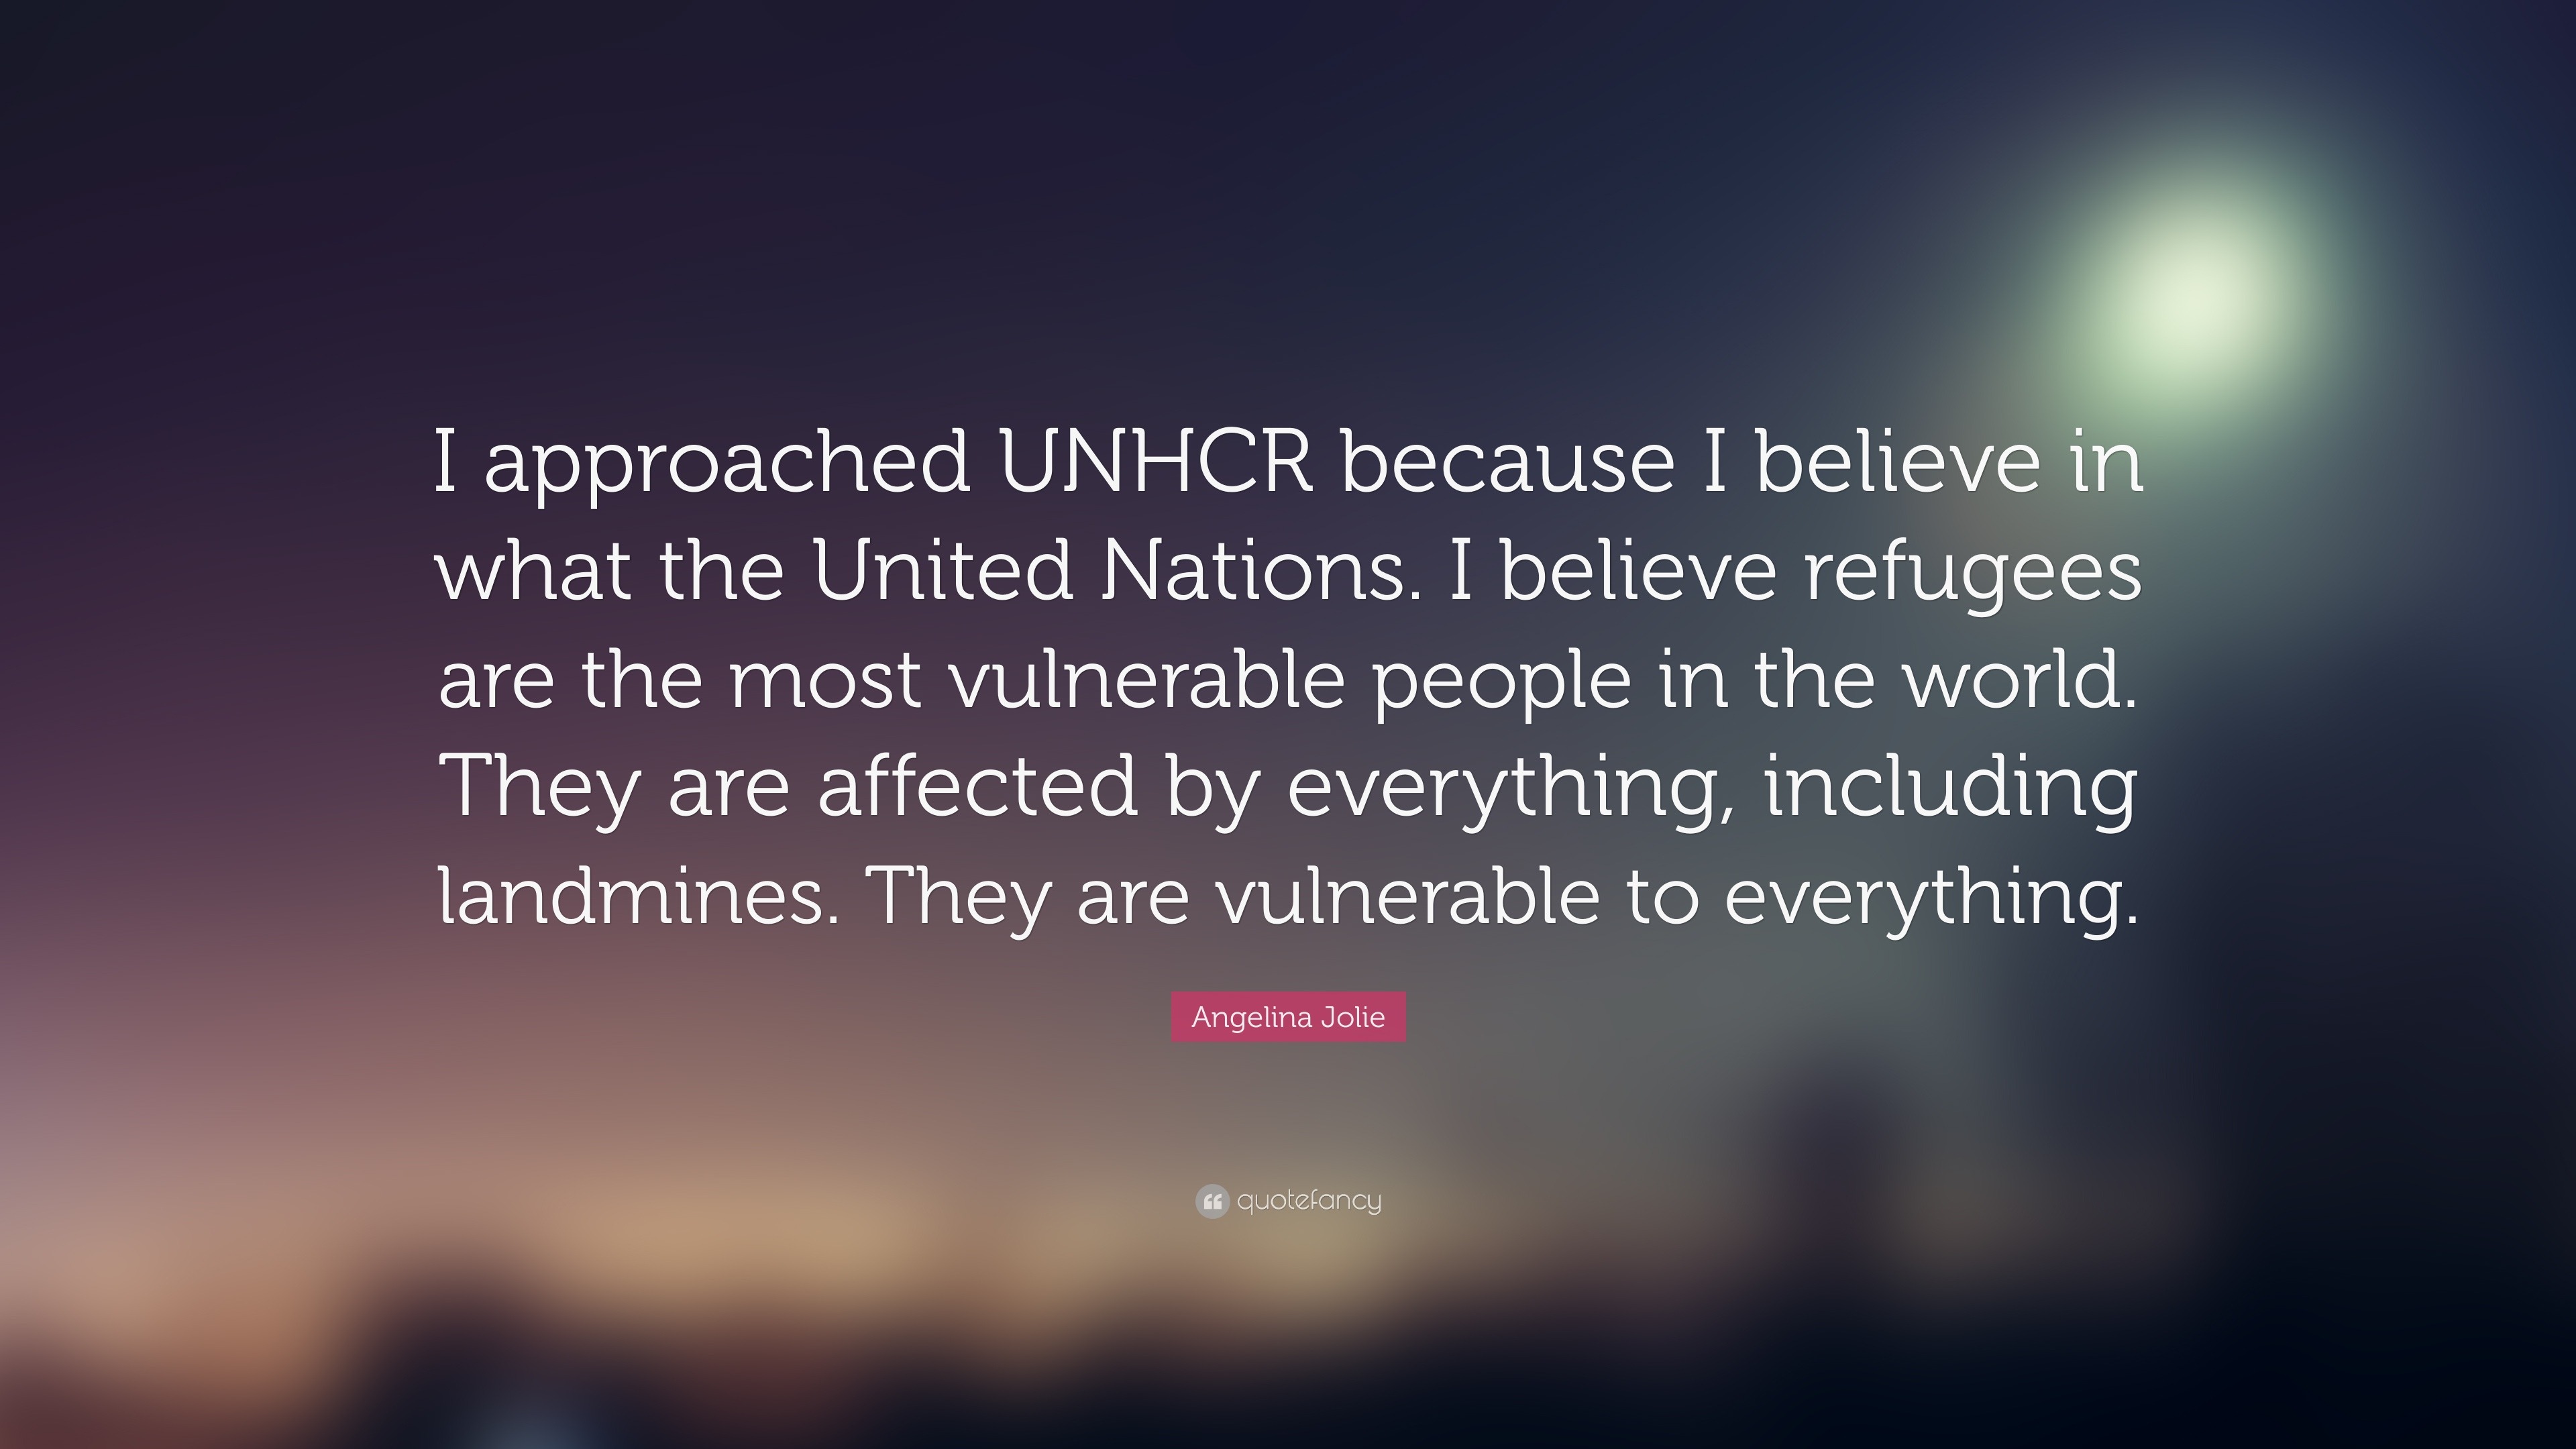 Angelina Jolie Quote: "I approached UNHCR because I believe in what the United Nations. I ...